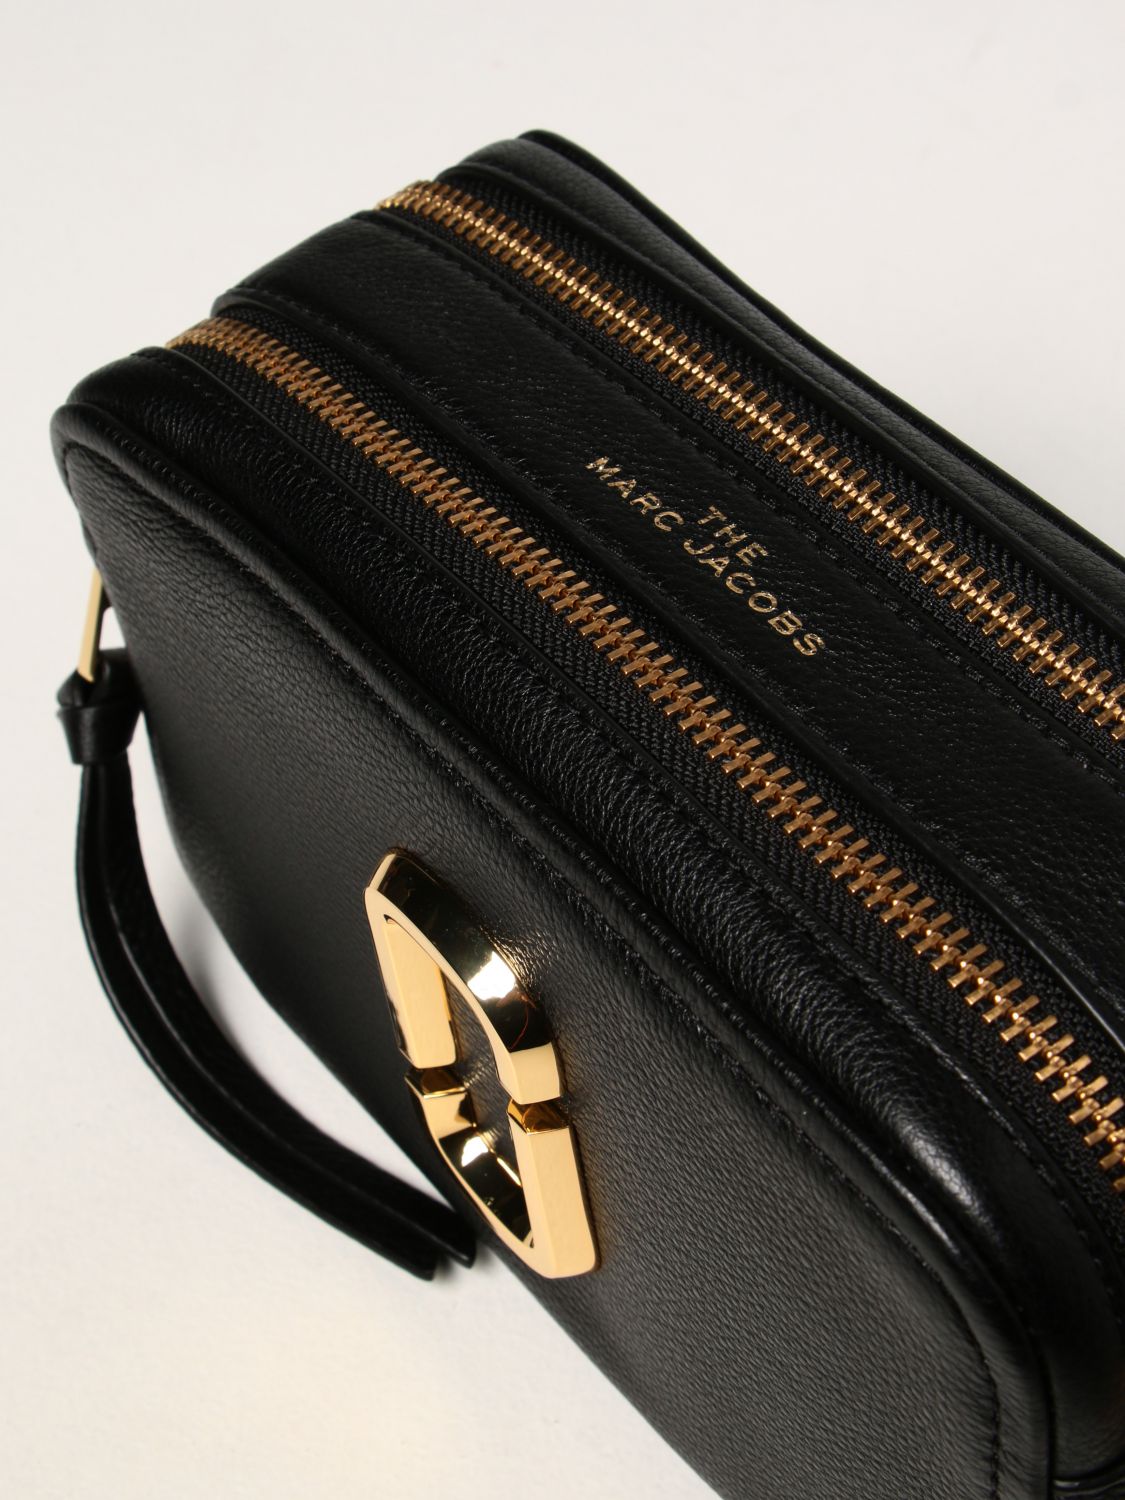 Marc Jacobs - Authenticated The Softshot Handbag - Leather Black Plain for Women, Very Good Condition